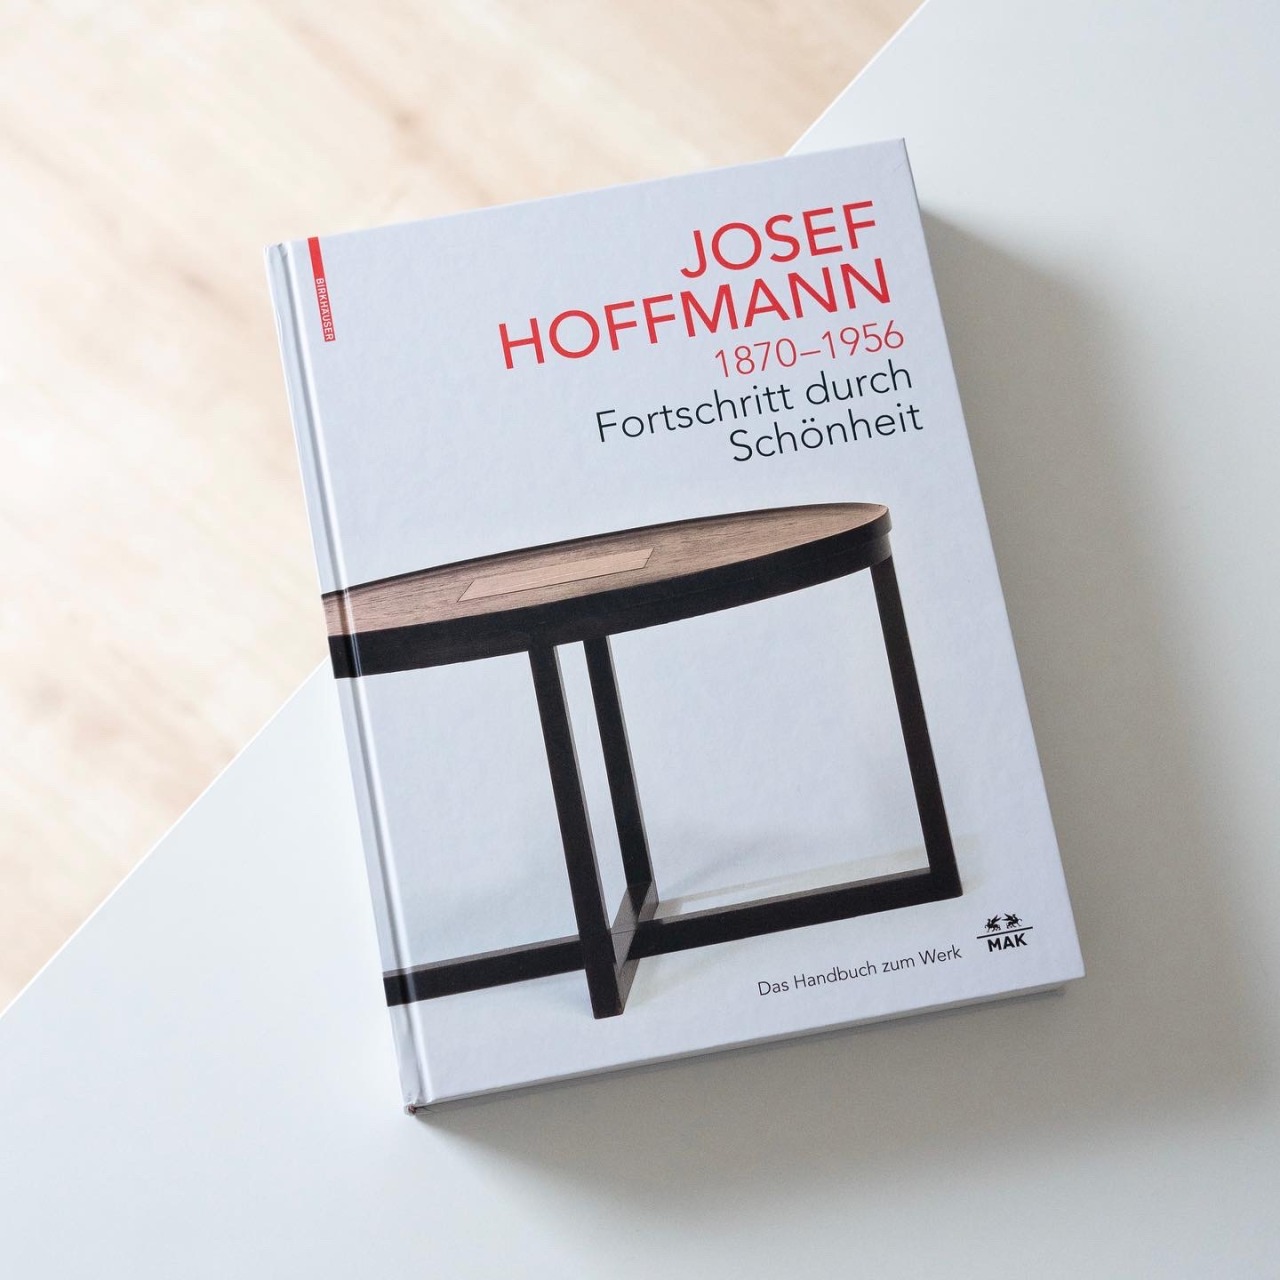 As co-founder of the Wiener Werkstätten, the Vienna Secession and the German and Austrian Werkbund his name is anchored in the history of modern architecture and design: Josef Hoffmann (1870-1956). Being a total designer he gave as much thought to...